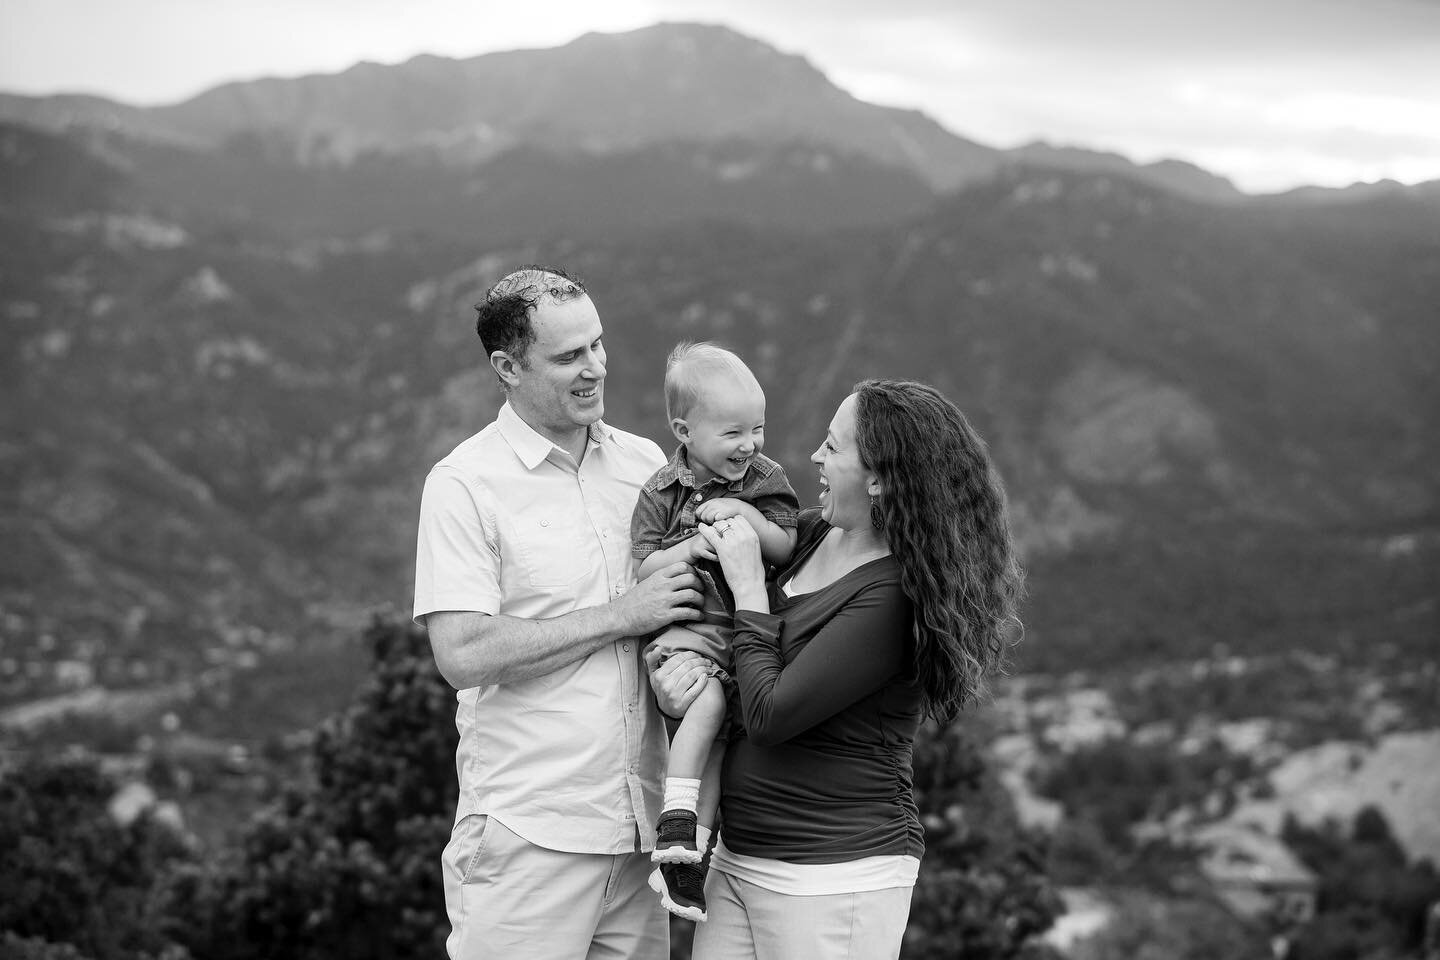 Prepping this cute family&rsquo;s session for delivery today!! Love those little toddler giggles!